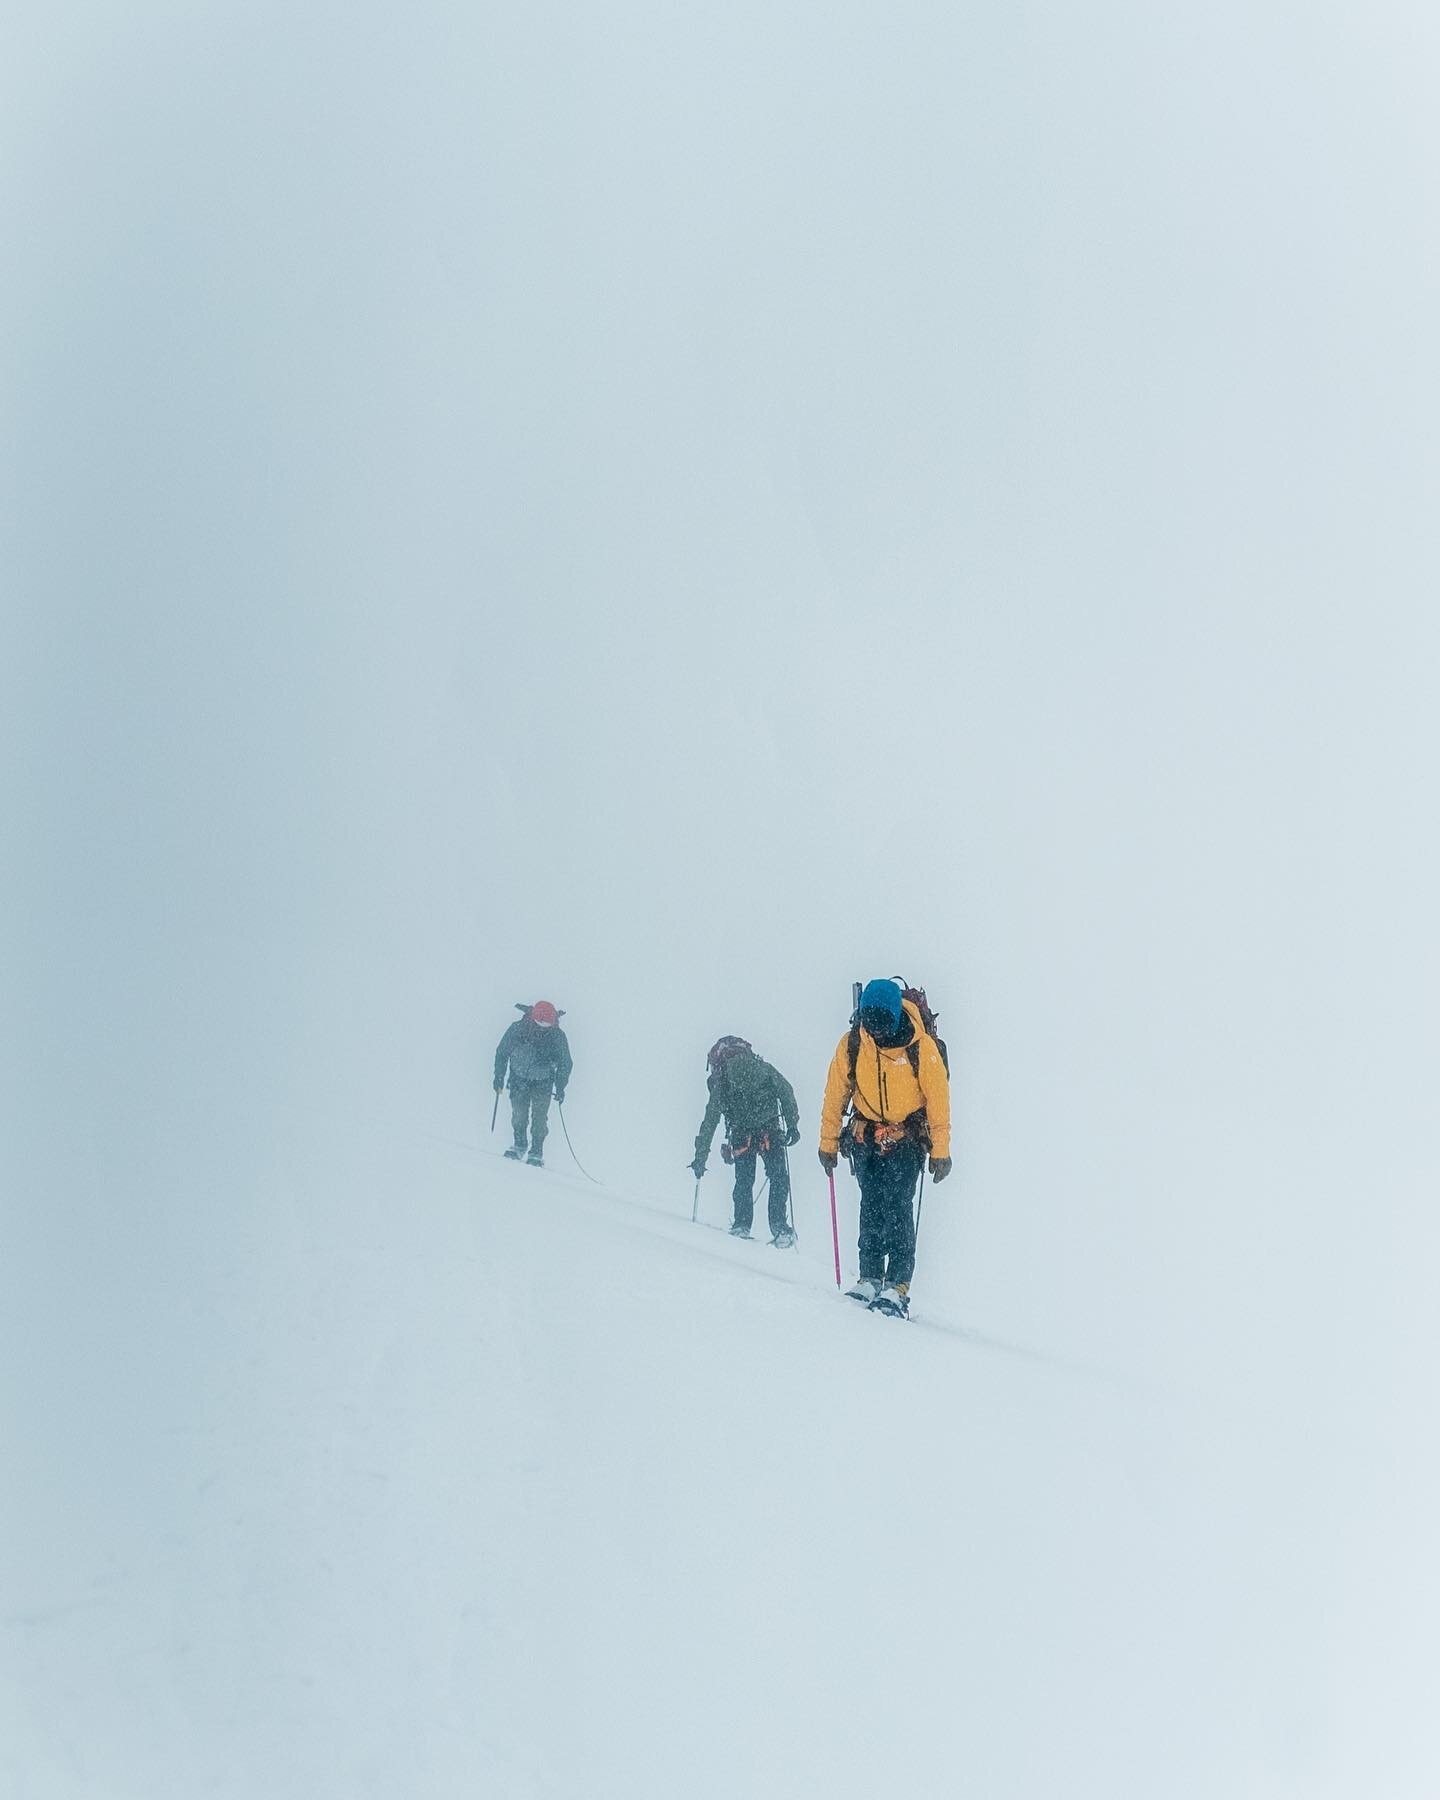 In the ping-pong ball, also known as whiteout conditions. 
.
.
#alpinism #northcascades #mountaineering #alpineclimbing #mountainlovers #sonyalpha #pnwoutsiders #visitthepnw